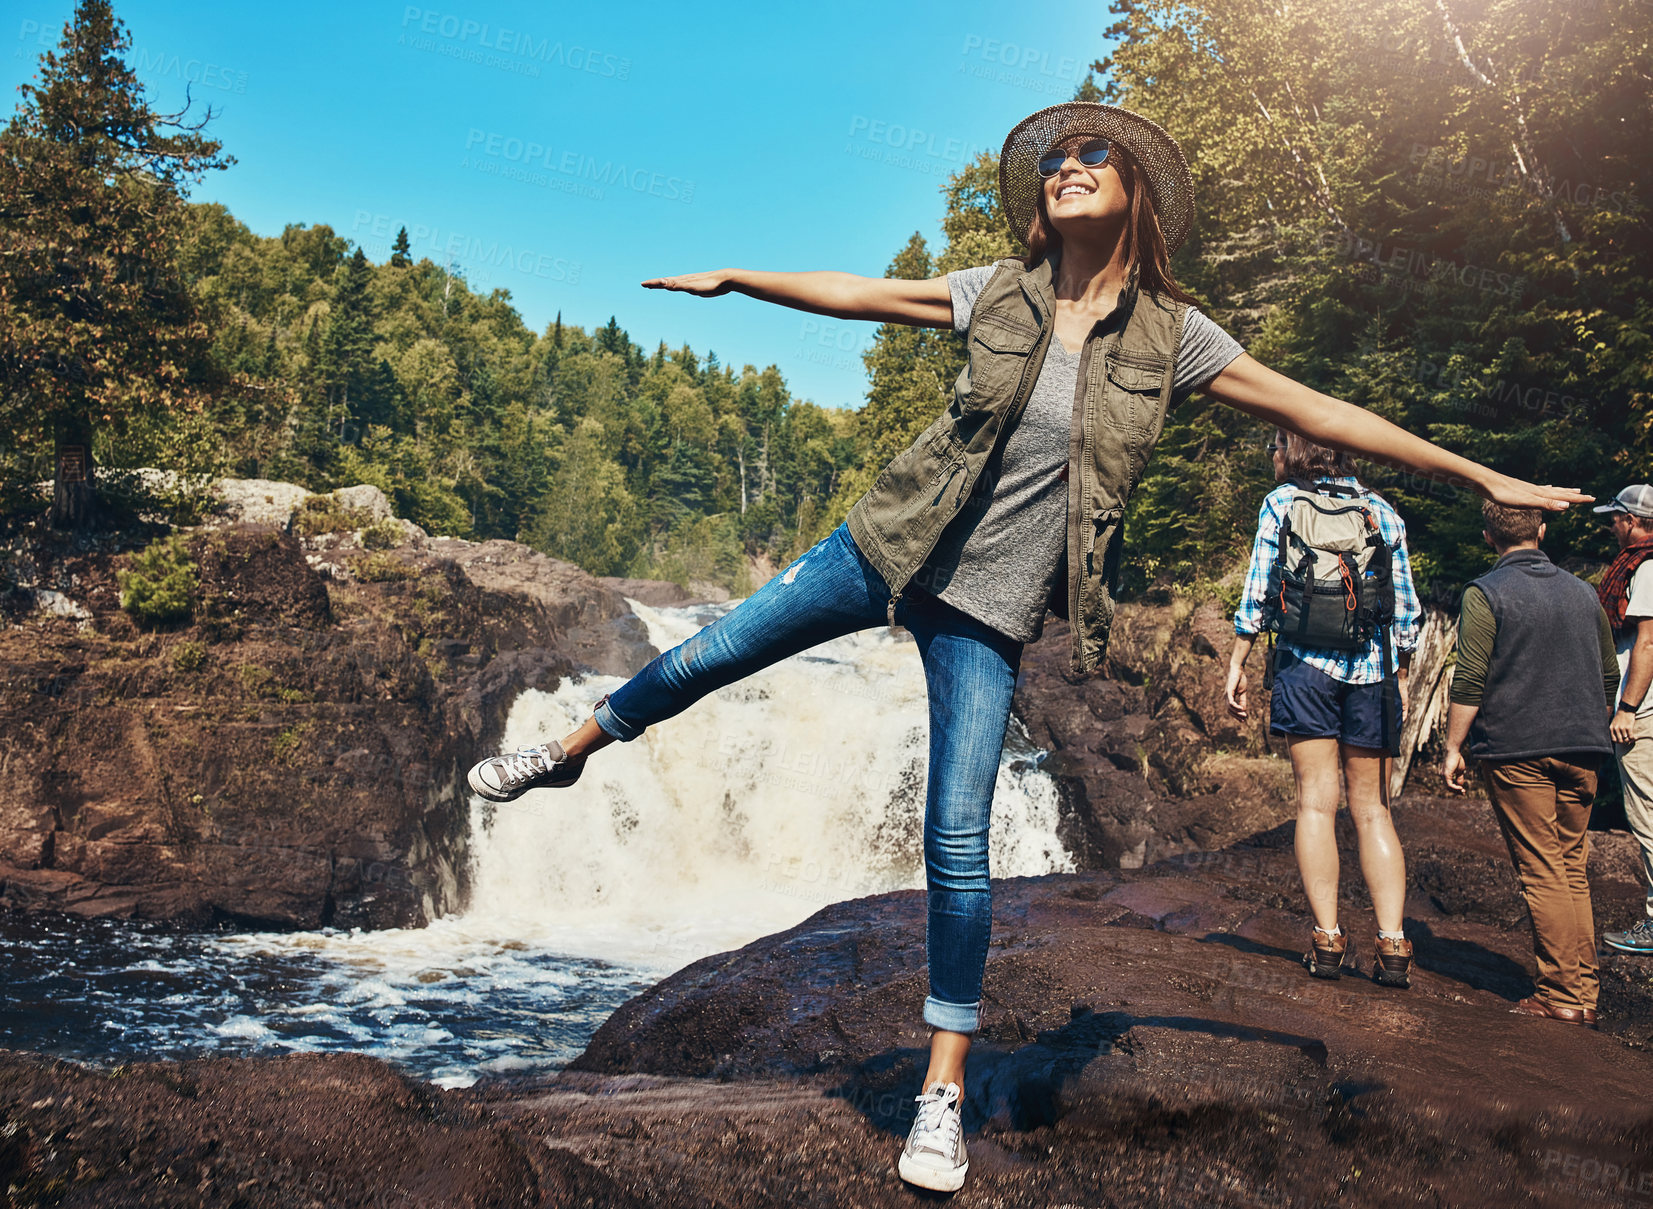 Buy stock photo Shot of a young woman having fun next to a rocky river and waterfall with her friends in the background